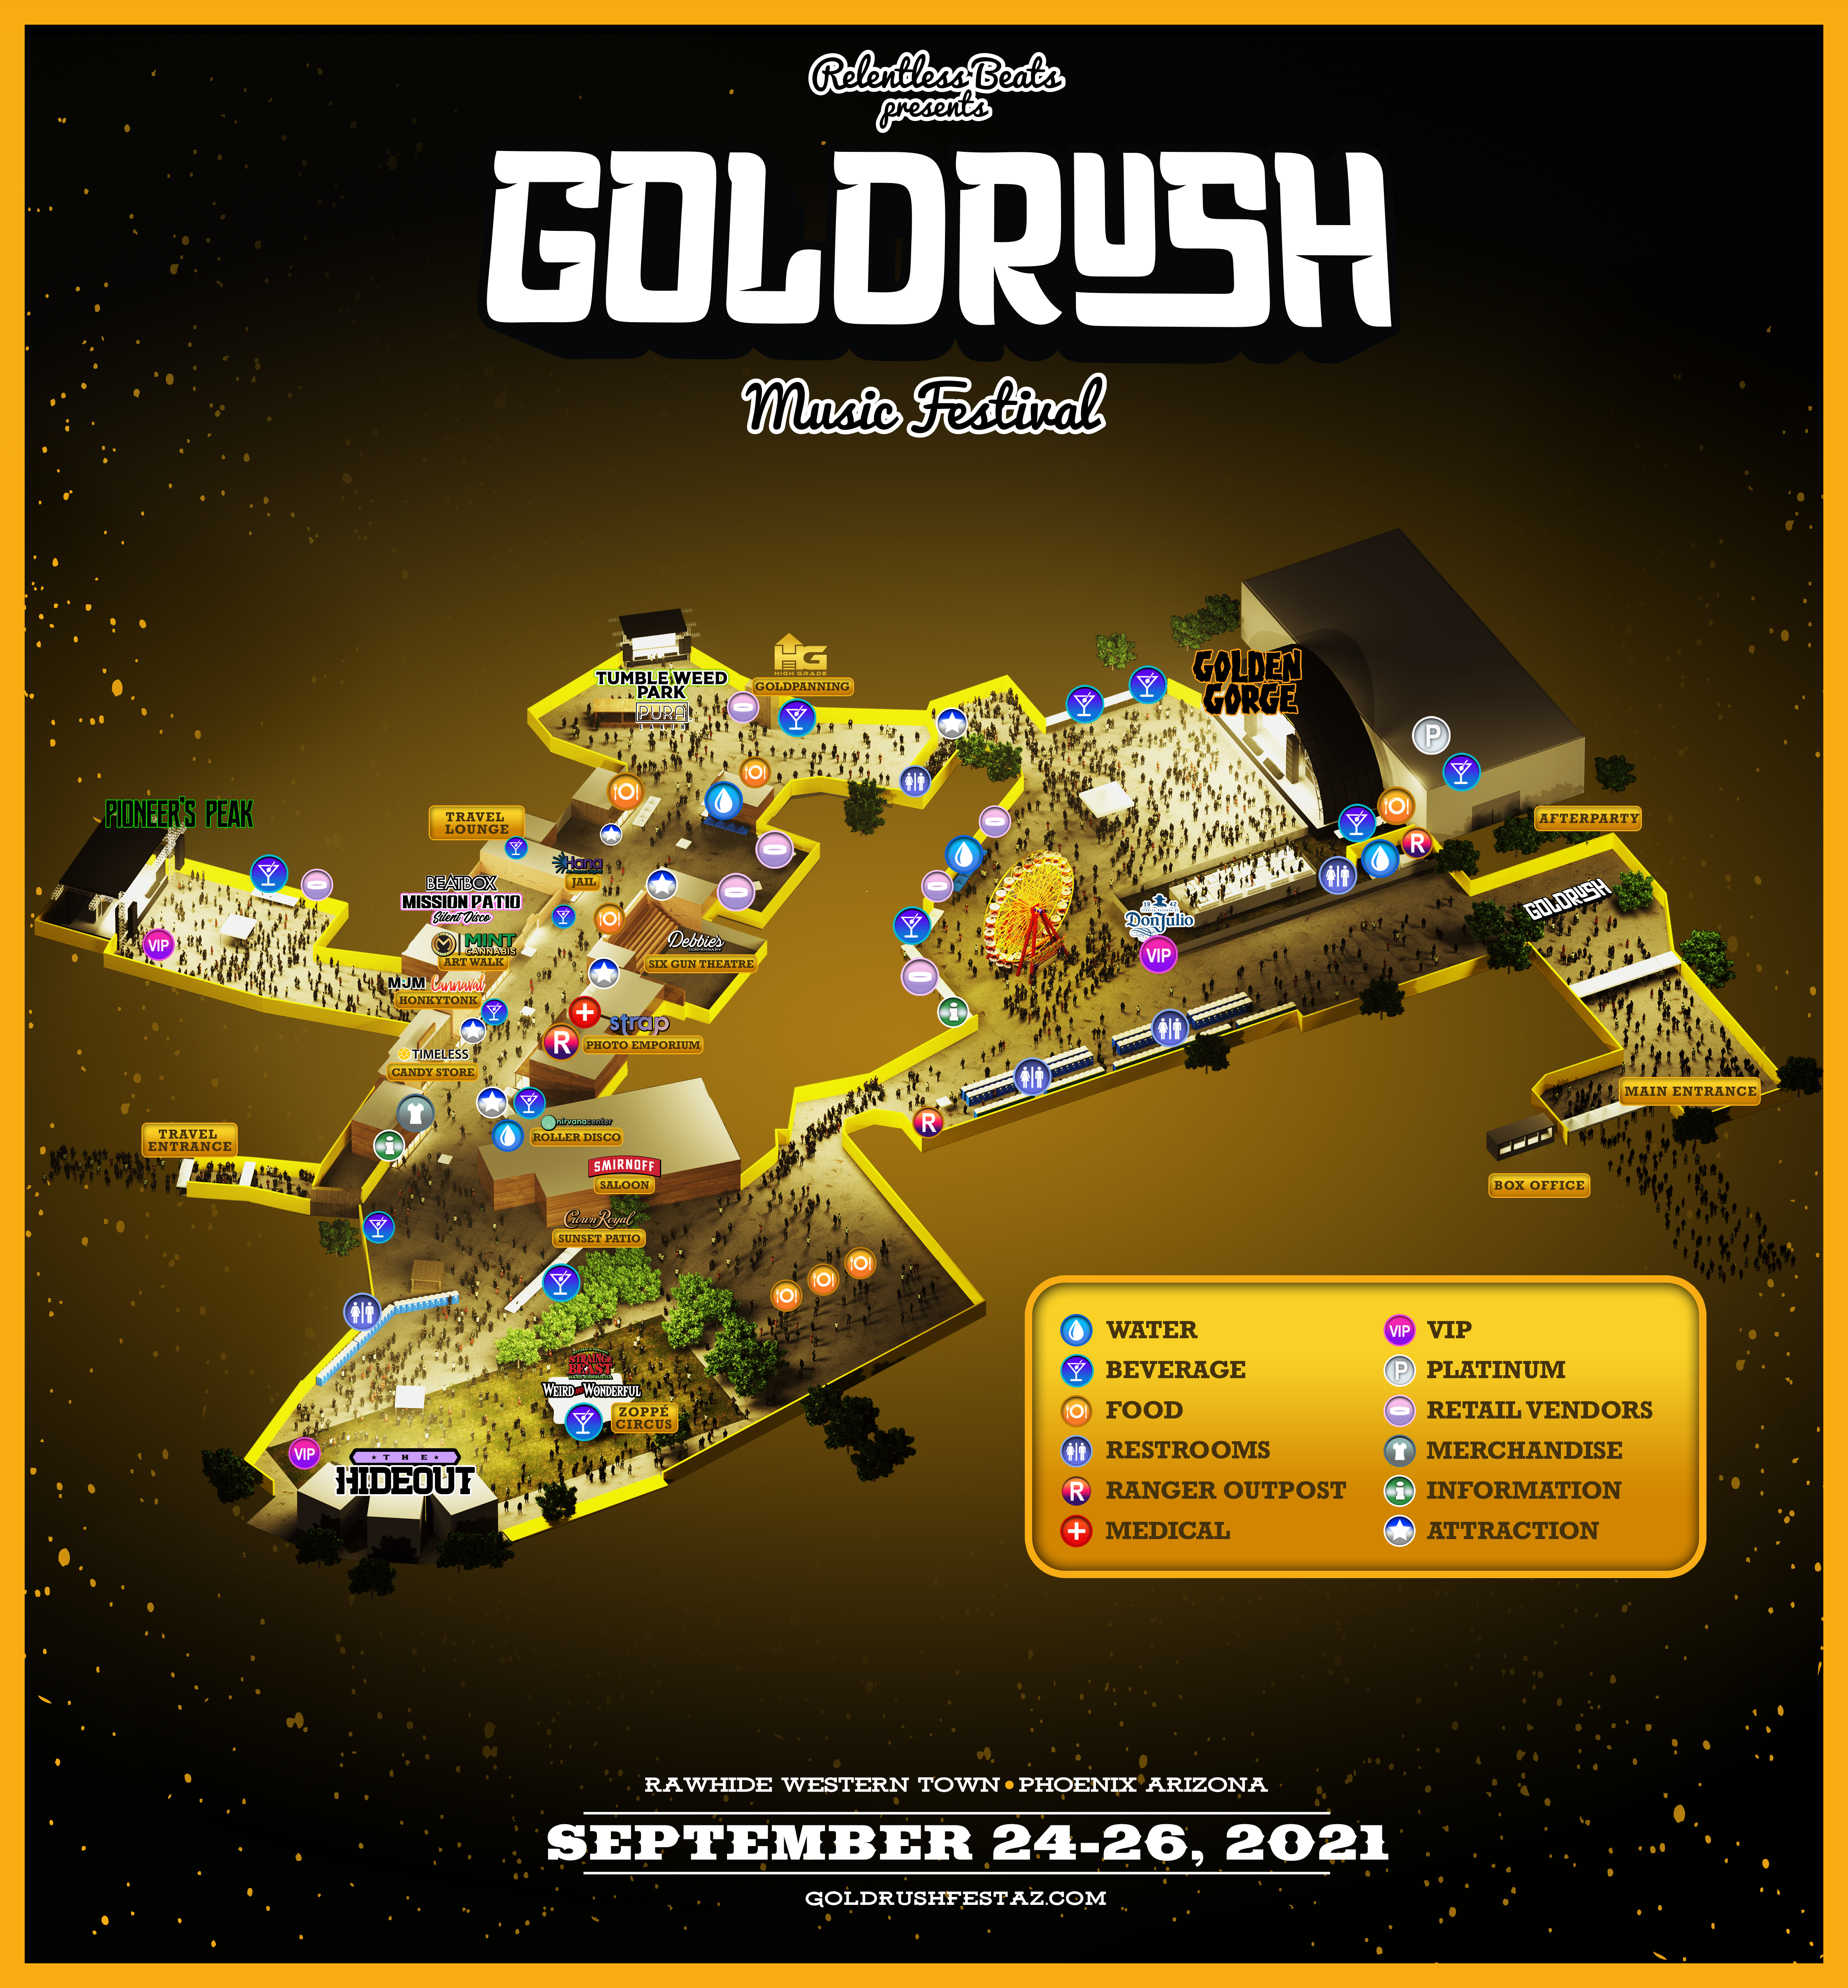 Goldrush Music Festival map and layout. Photo provided.